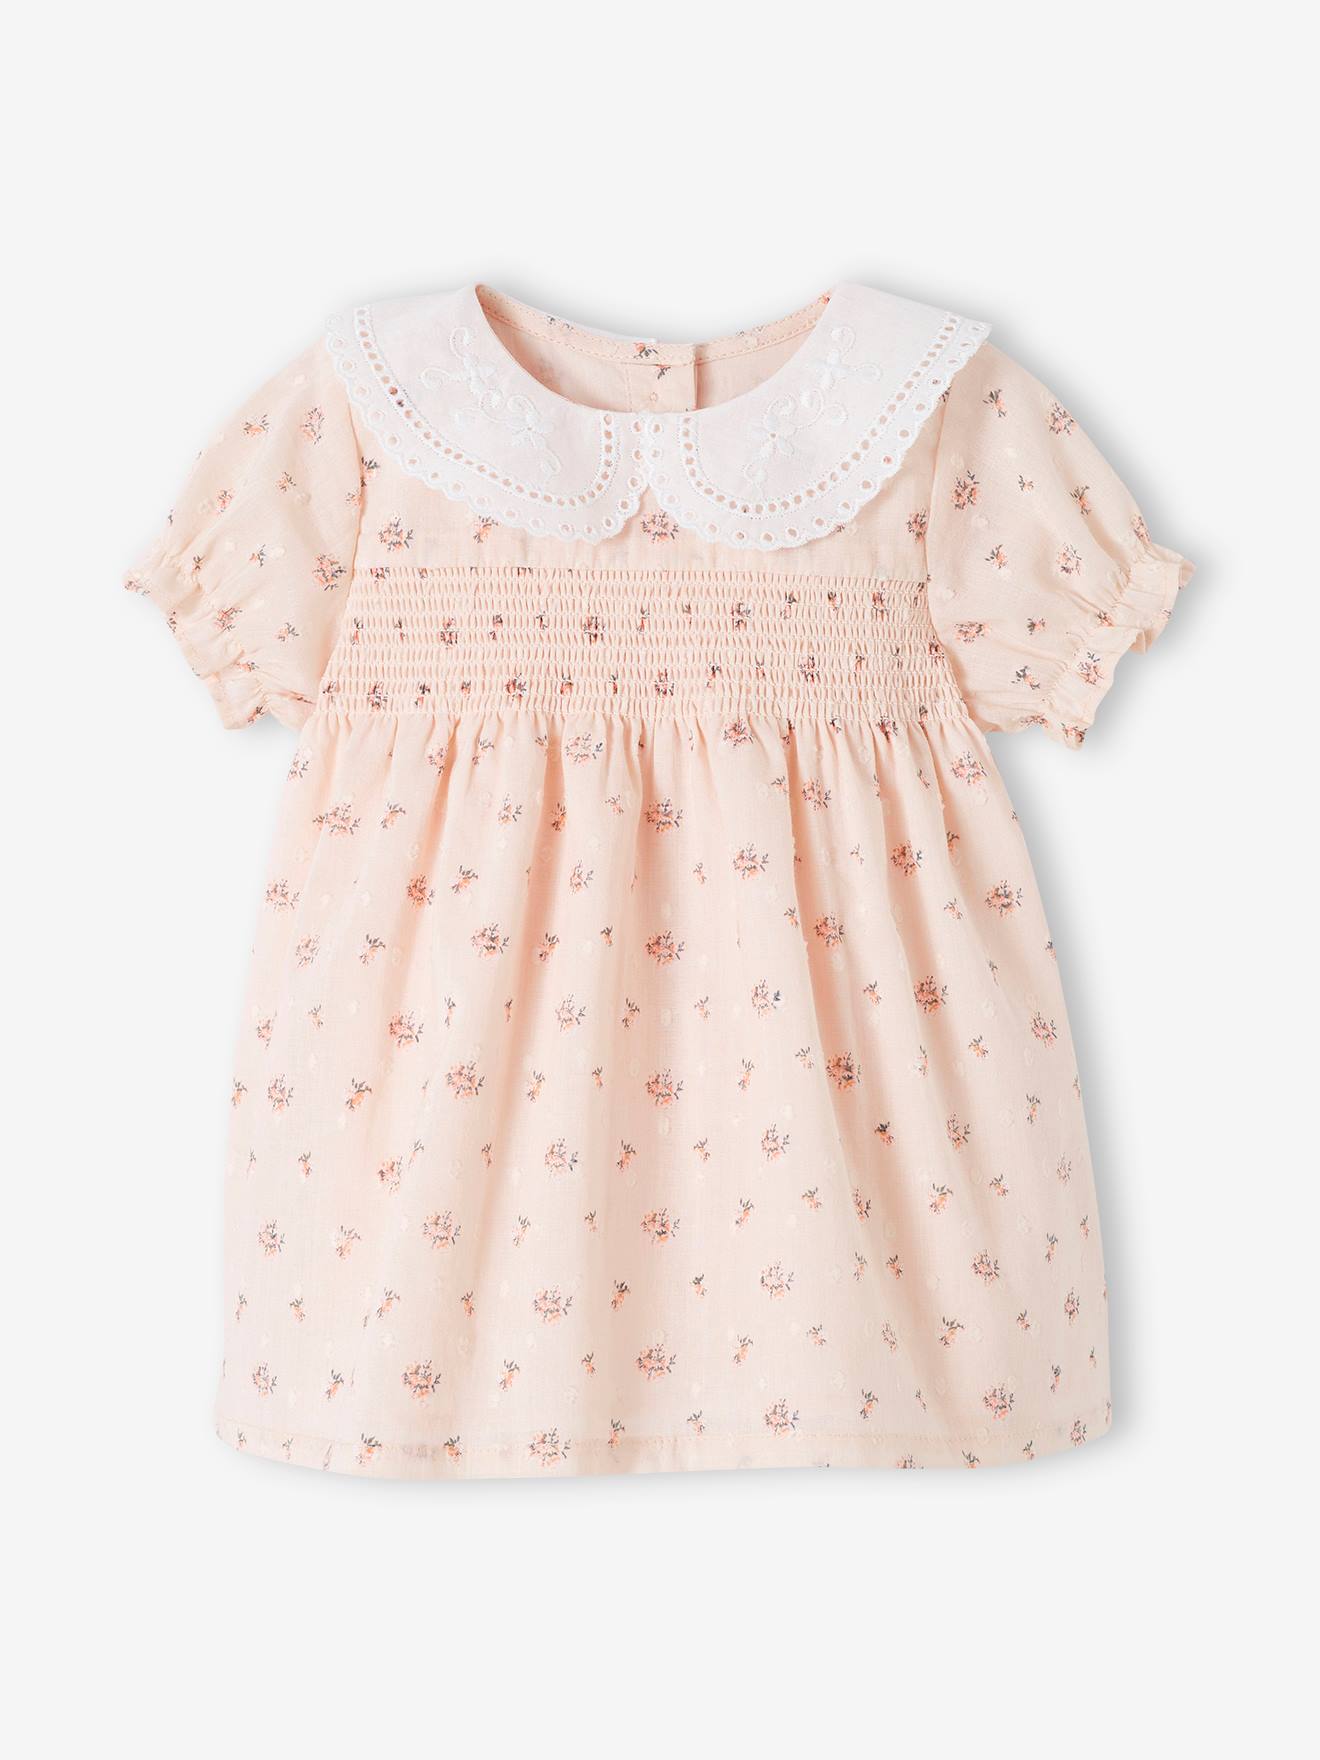 Smocked Dress with Broderie Anglaise Collar for Newborn Babies pale pink